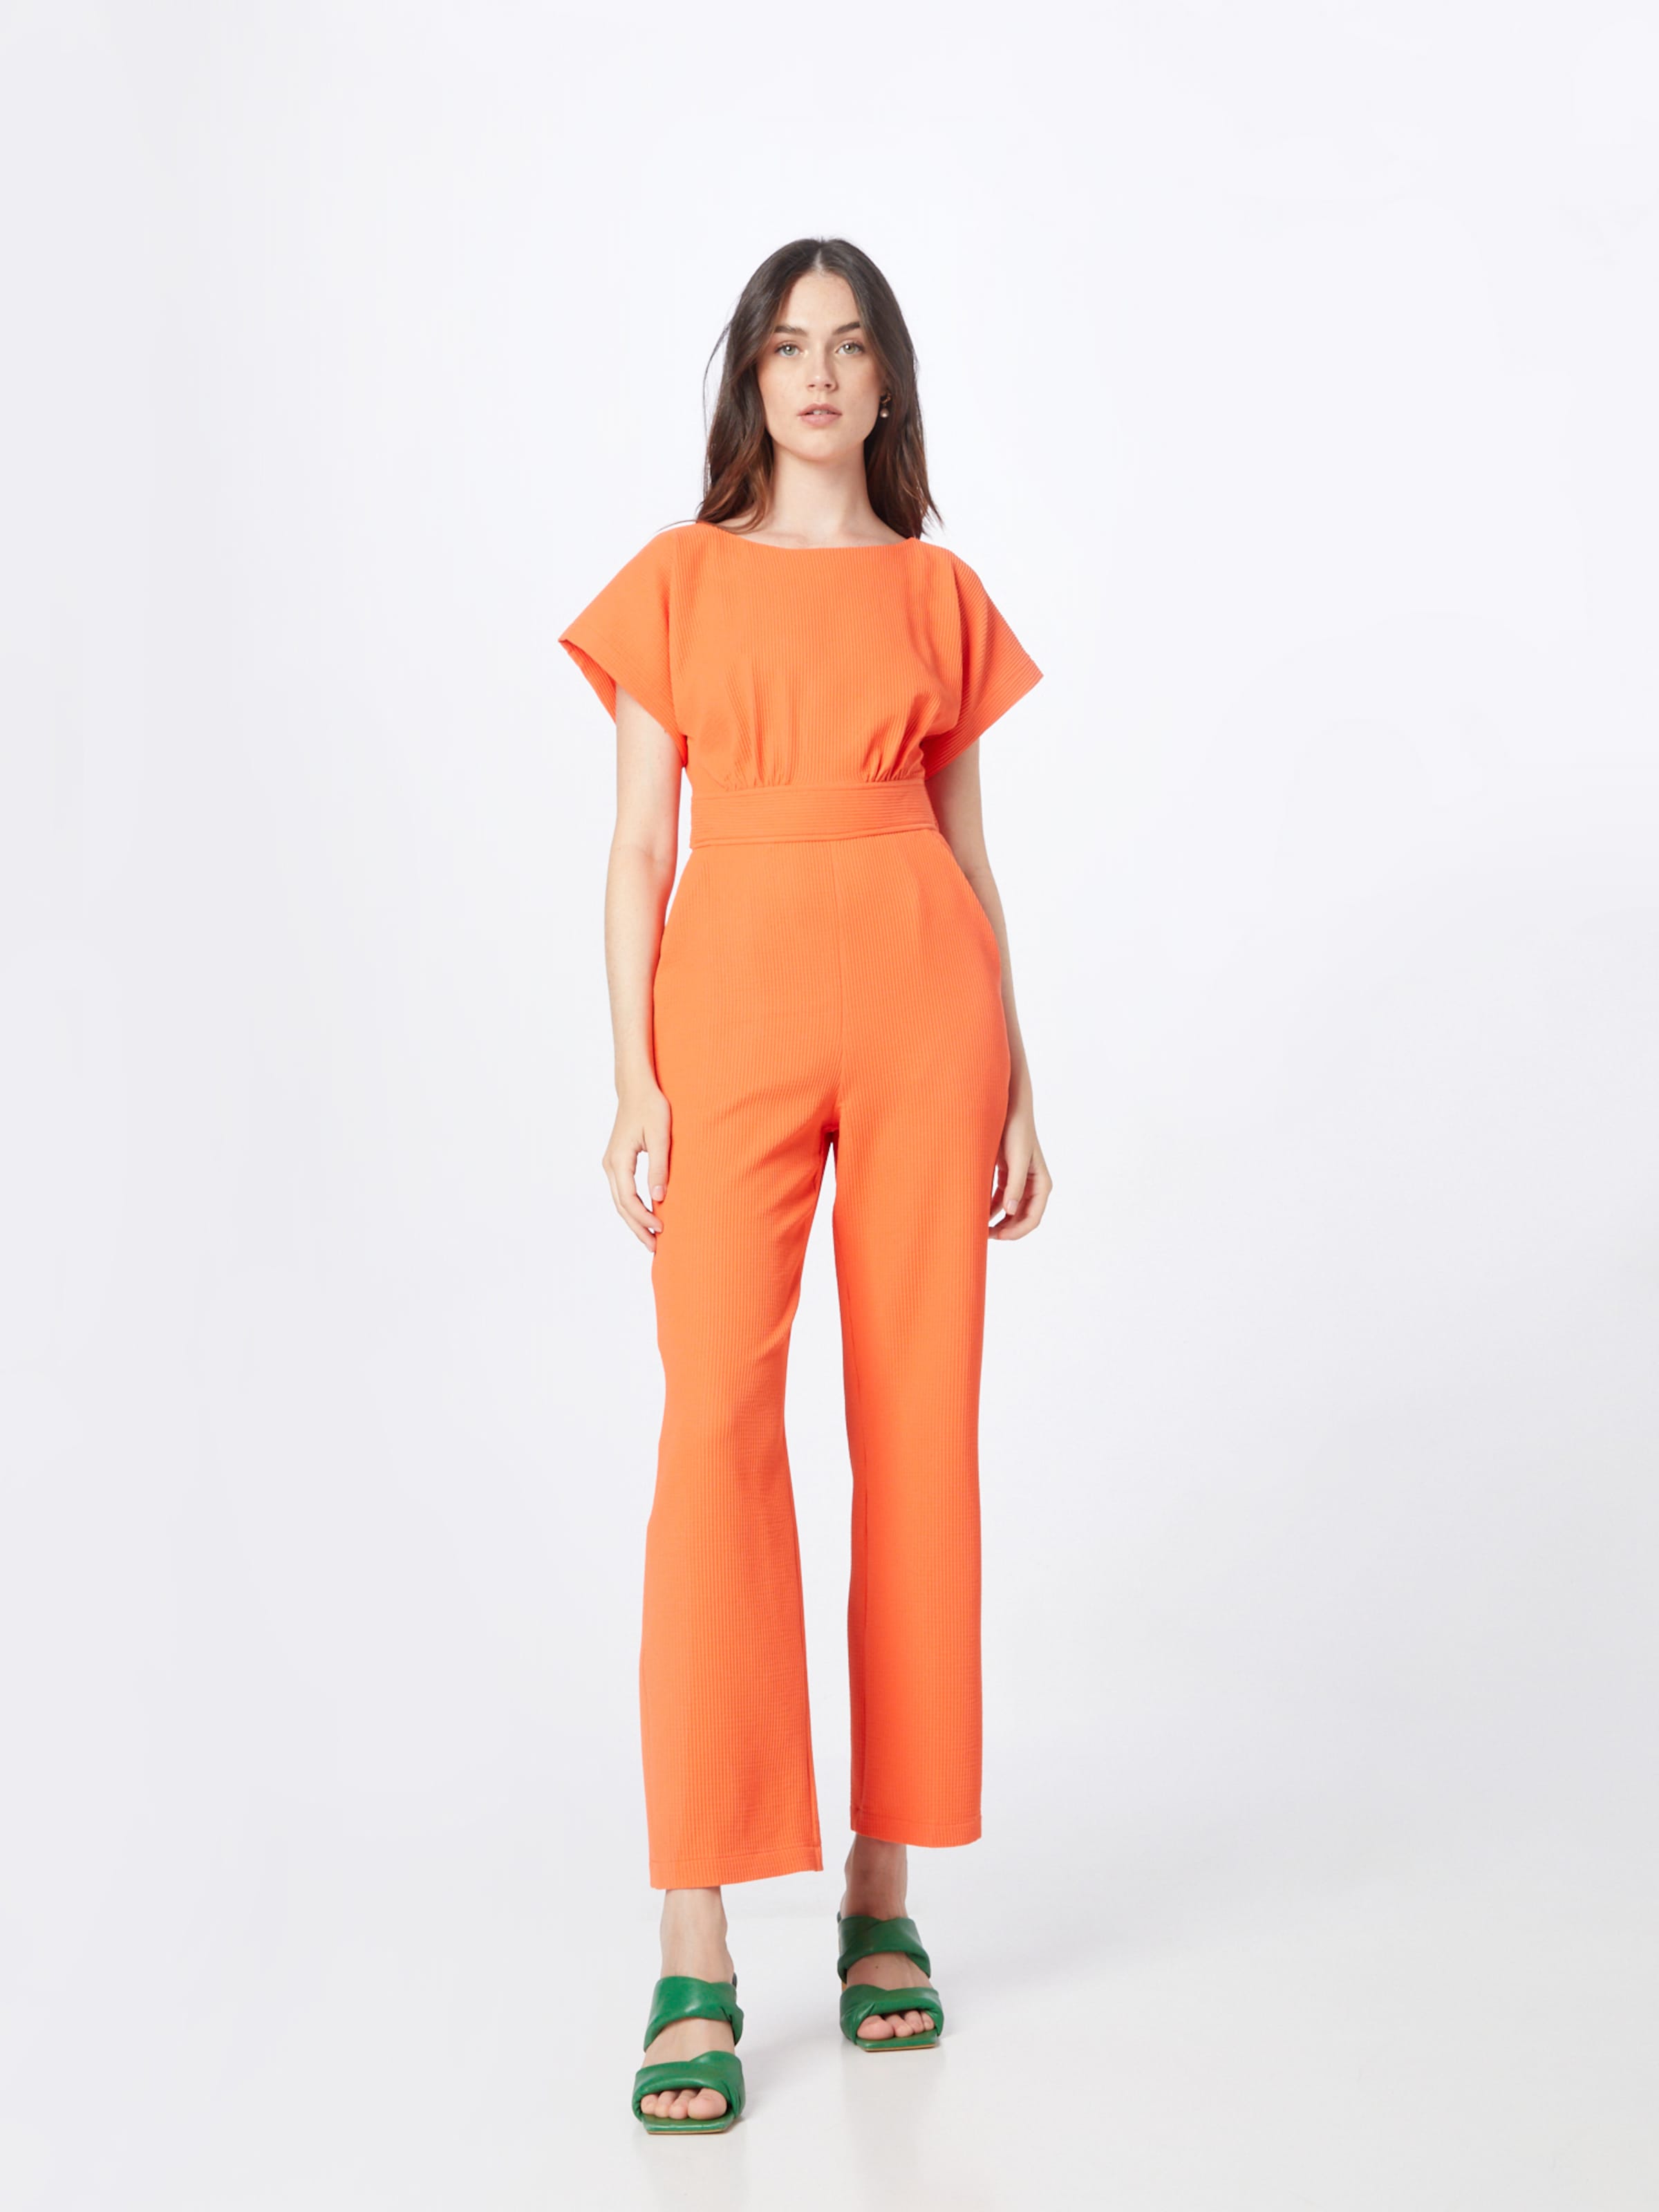 The SELL OUT Closet London jumpsuit is... - GetThatTrend.com | Facebook